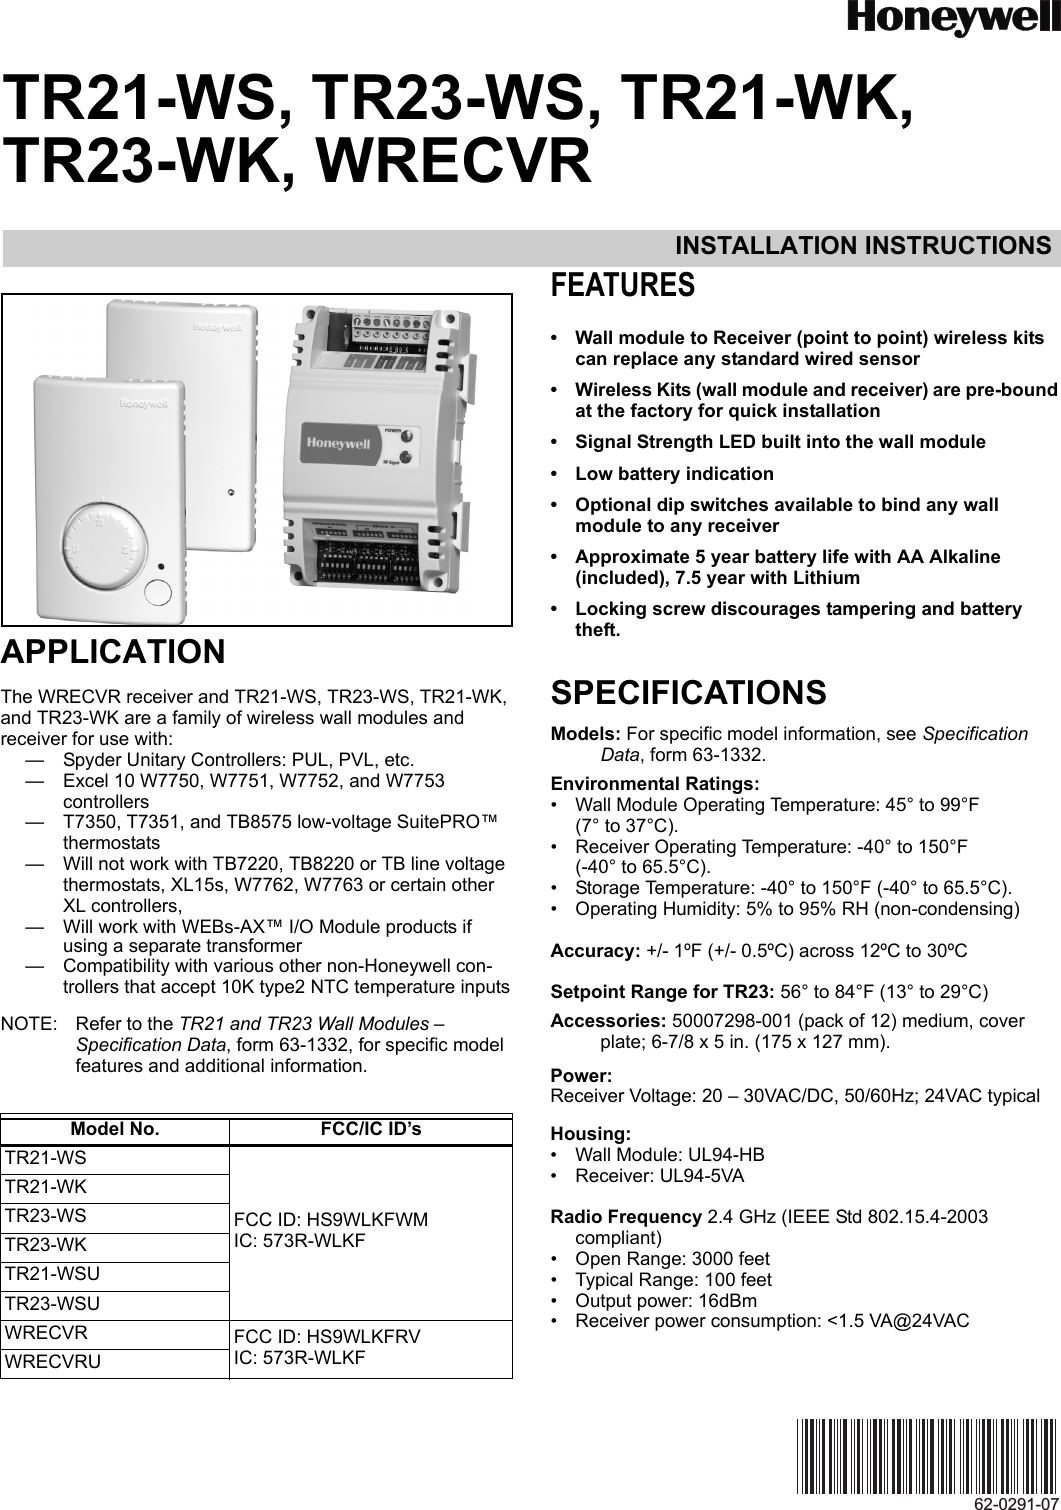 INSTALLATION INSTRUCTIONS62-0291-07TR21-WS, TR23-WS, TR21-WK, TR23-WK, WRECVRAPPLICATIONThe WRECVR receiver and TR21-WS, TR23-WS, TR21-WK, and TR23-WK are a family of wireless wall modules and receiver for use with: — Spyder Unitary Controllers: PUL, PVL, etc.— Excel 10 W7750, W7751, W7752, and W7753 controllers— T7350, T7351, and TB8575 low-voltage SuitePRO™  thermostats— Will not work with TB7220, TB8220 or TB line voltage thermostats, XL15s, W7762, W7763 or certain other XL controllers, — Will work with WEBs-AX™ I/O Module products if using a separate transformer— Compatibility with various other non-Honeywell con-trollers that accept 10K type2 NTC temperature inputsNOTE: Refer to the TR21 and TR23 Wall Modules – Specification Data, form 63-1332, for specific model features and additional information.FEATURES• Wall module to Receiver (point to point) wireless kits can replace any standard wired sensor• Wireless Kits (wall module and receiver) are pre-bound at the factory for quick installation• Signal Strength LED built into the wall module• Low battery indication• Optional dip switches available to bind any wall module to any receiver• Approximate 5 year battery life with AA Alkaline (included), 7.5 year with Lithium• Locking screw discourages tampering and battery theft.SPECIFICATIONSModels: For specific model information, see Specification Data, form 63-1332.Environmental Ratings:• Wall Module Operating Temperature: 45° to 99°F (7° to 37°C).• Receiver Operating Temperature: -40° to 150°F(-40° to 65.5°C).• Storage Temperature: -40° to 150°F (-40° to 65.5°C).• Operating Humidity: 5% to 95% RH (non-condensing)Accuracy: +/- 1ºF (+/- 0.5ºC) across 12ºC to 30ºCSetpoint Range for TR23: 56° to 84°F (13° to 29°C)Accessories: 50007298-001 (pack of 12) medium, cover plate; 6-7/8 x 5 in. (175 x 127 mm).Power:Receiver Voltage: 20 – 30VAC/DC, 50/60Hz; 24VAC typicalHousing: • Wall Module: UL94-HB• Receiver: UL94-5VARadio Frequency 2.4 GHz (IEEE Std 802.15.4-2003 compliant)• Open Range: 3000 feet• Typical Range: 100 feet• Output power: 16dBm• Receiver power consumption: &lt;1.5 VA@24VACModel No. FCC/IC ID’sTR21-WSFCC ID: HS9WLKFWMIC: 573R-WLKFTR21-WKTR23-WSTR23-WKTR21-WSUTR23-WSUWRECVR FCC ID: HS9WLKFRVIC: 573R-WLKFWRECVRU